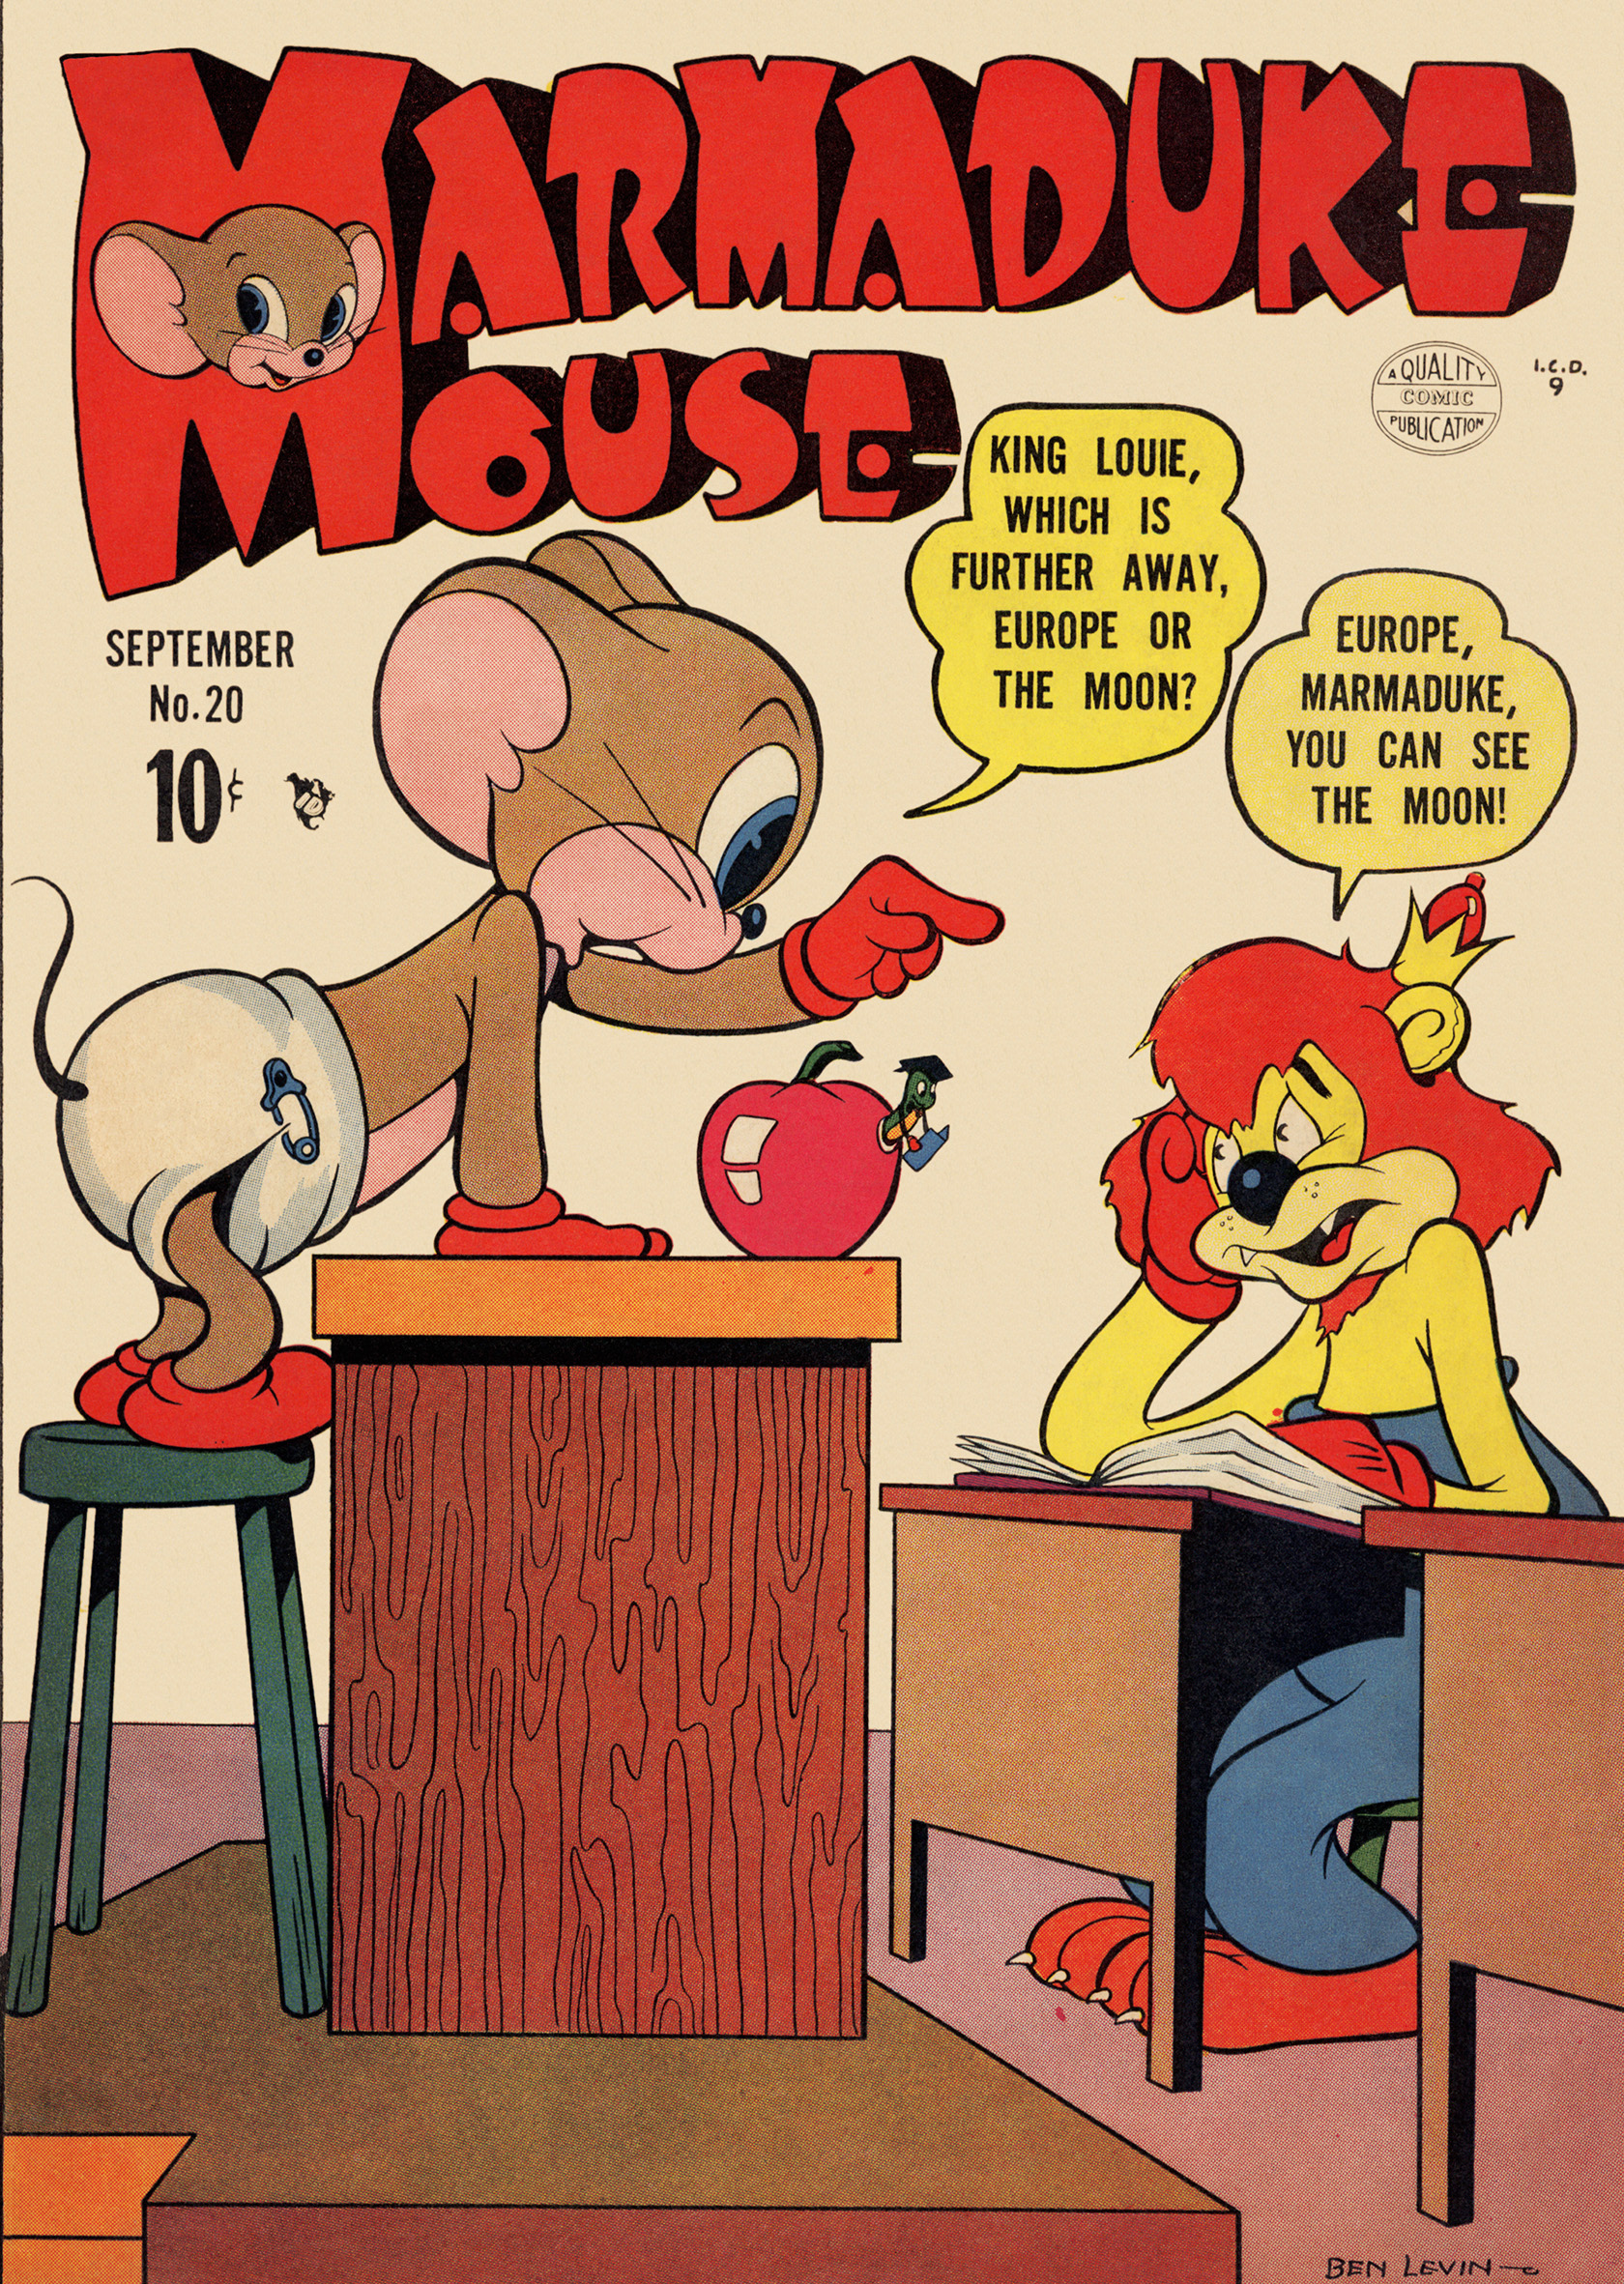 Read online Marmaduke Mouse comic -  Issue #20 - 1